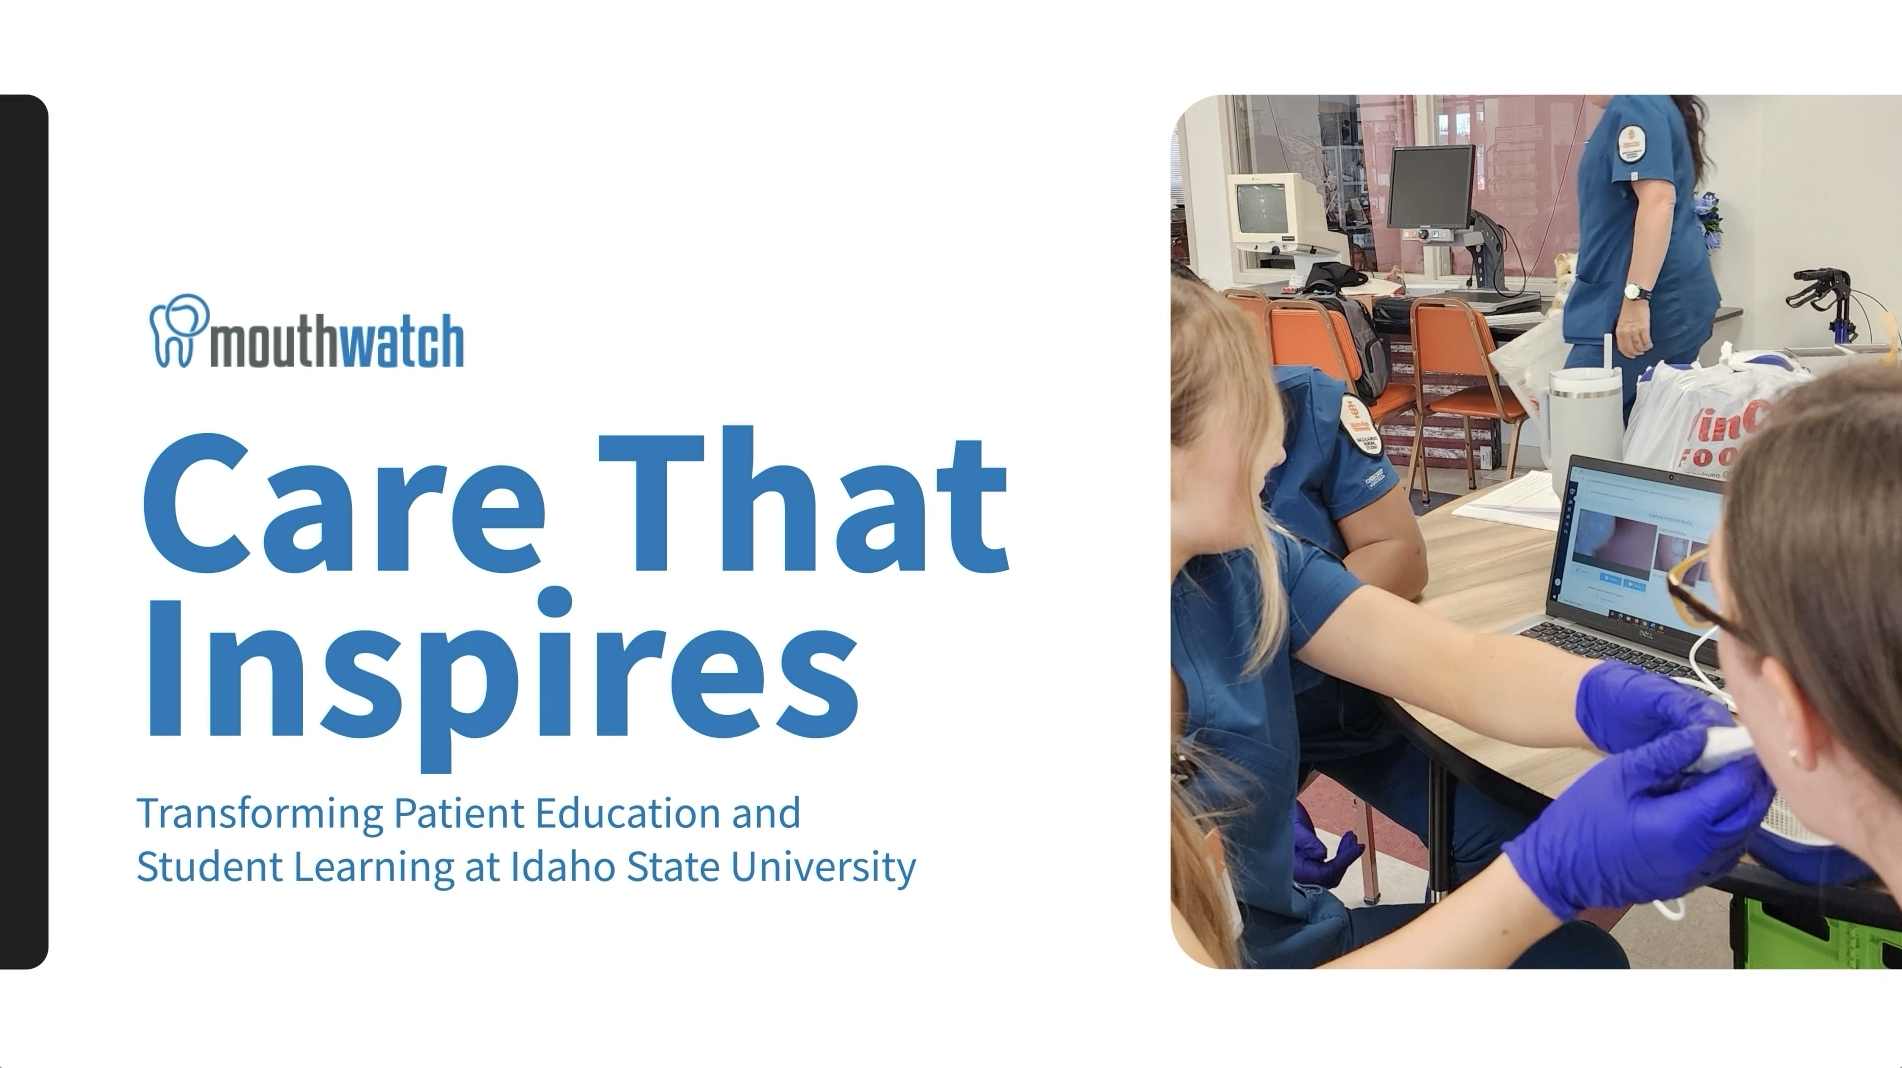 Care That Inspires: Transforming Patient Education and Student Learning at Idaho State University